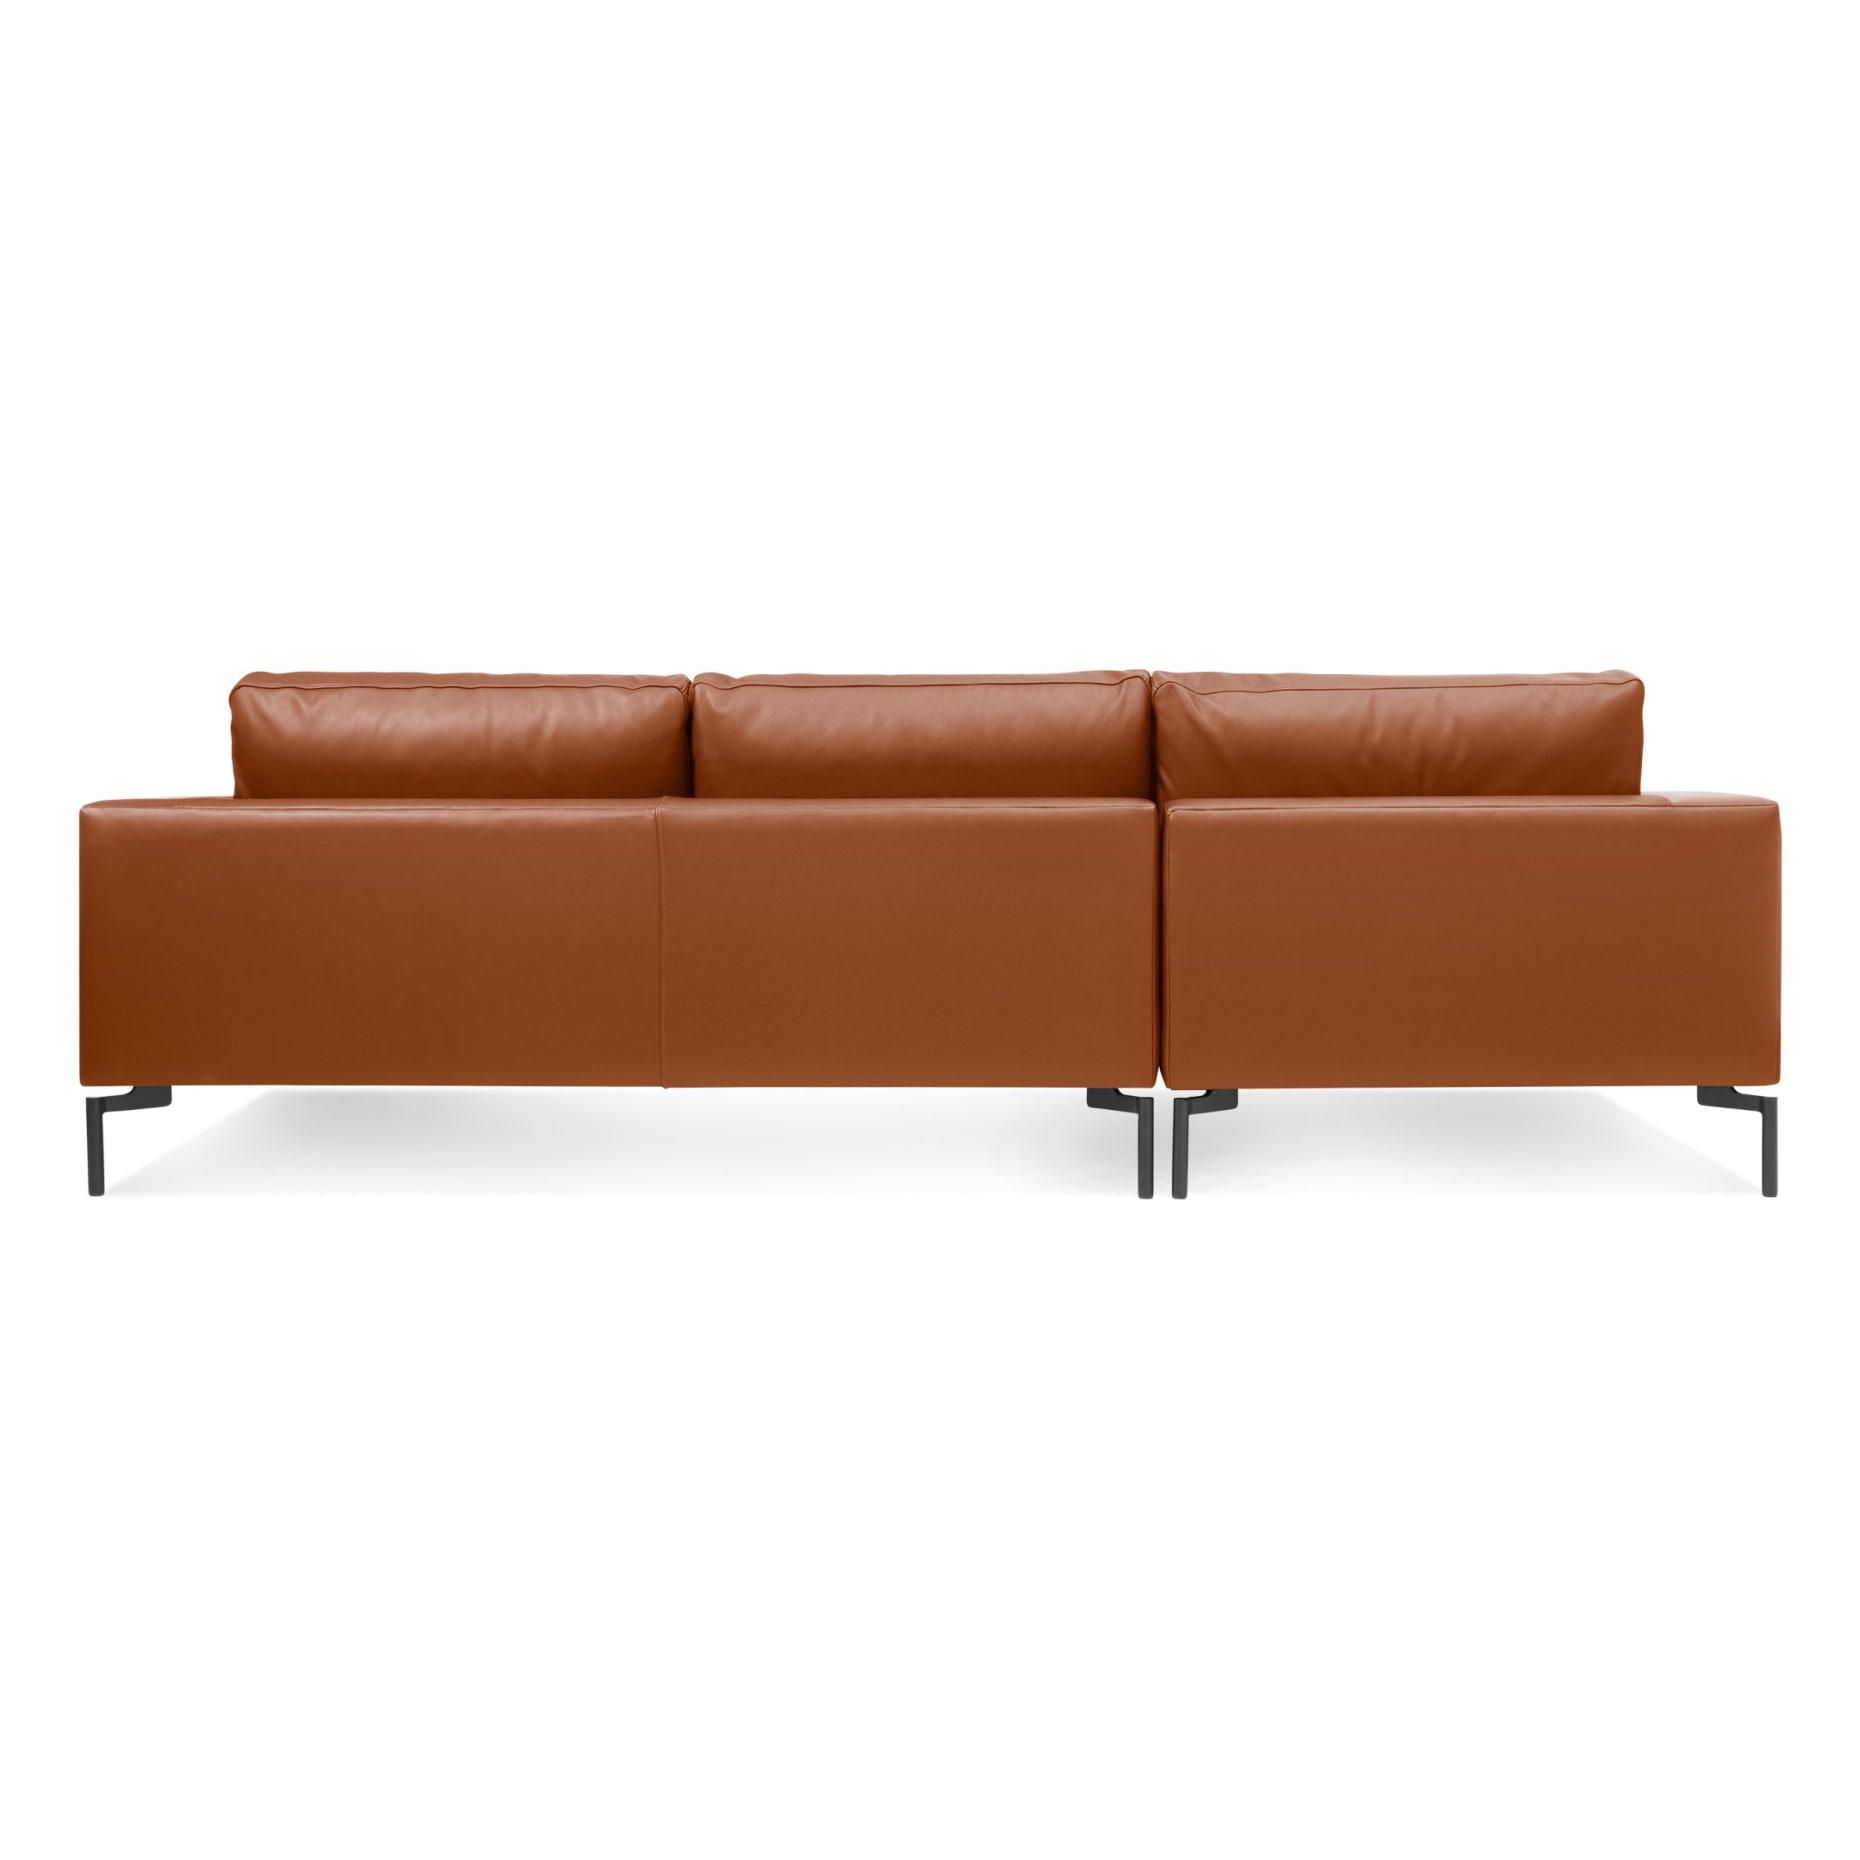 NEW STANDARD LEATHER SOFA W/ CHAISE